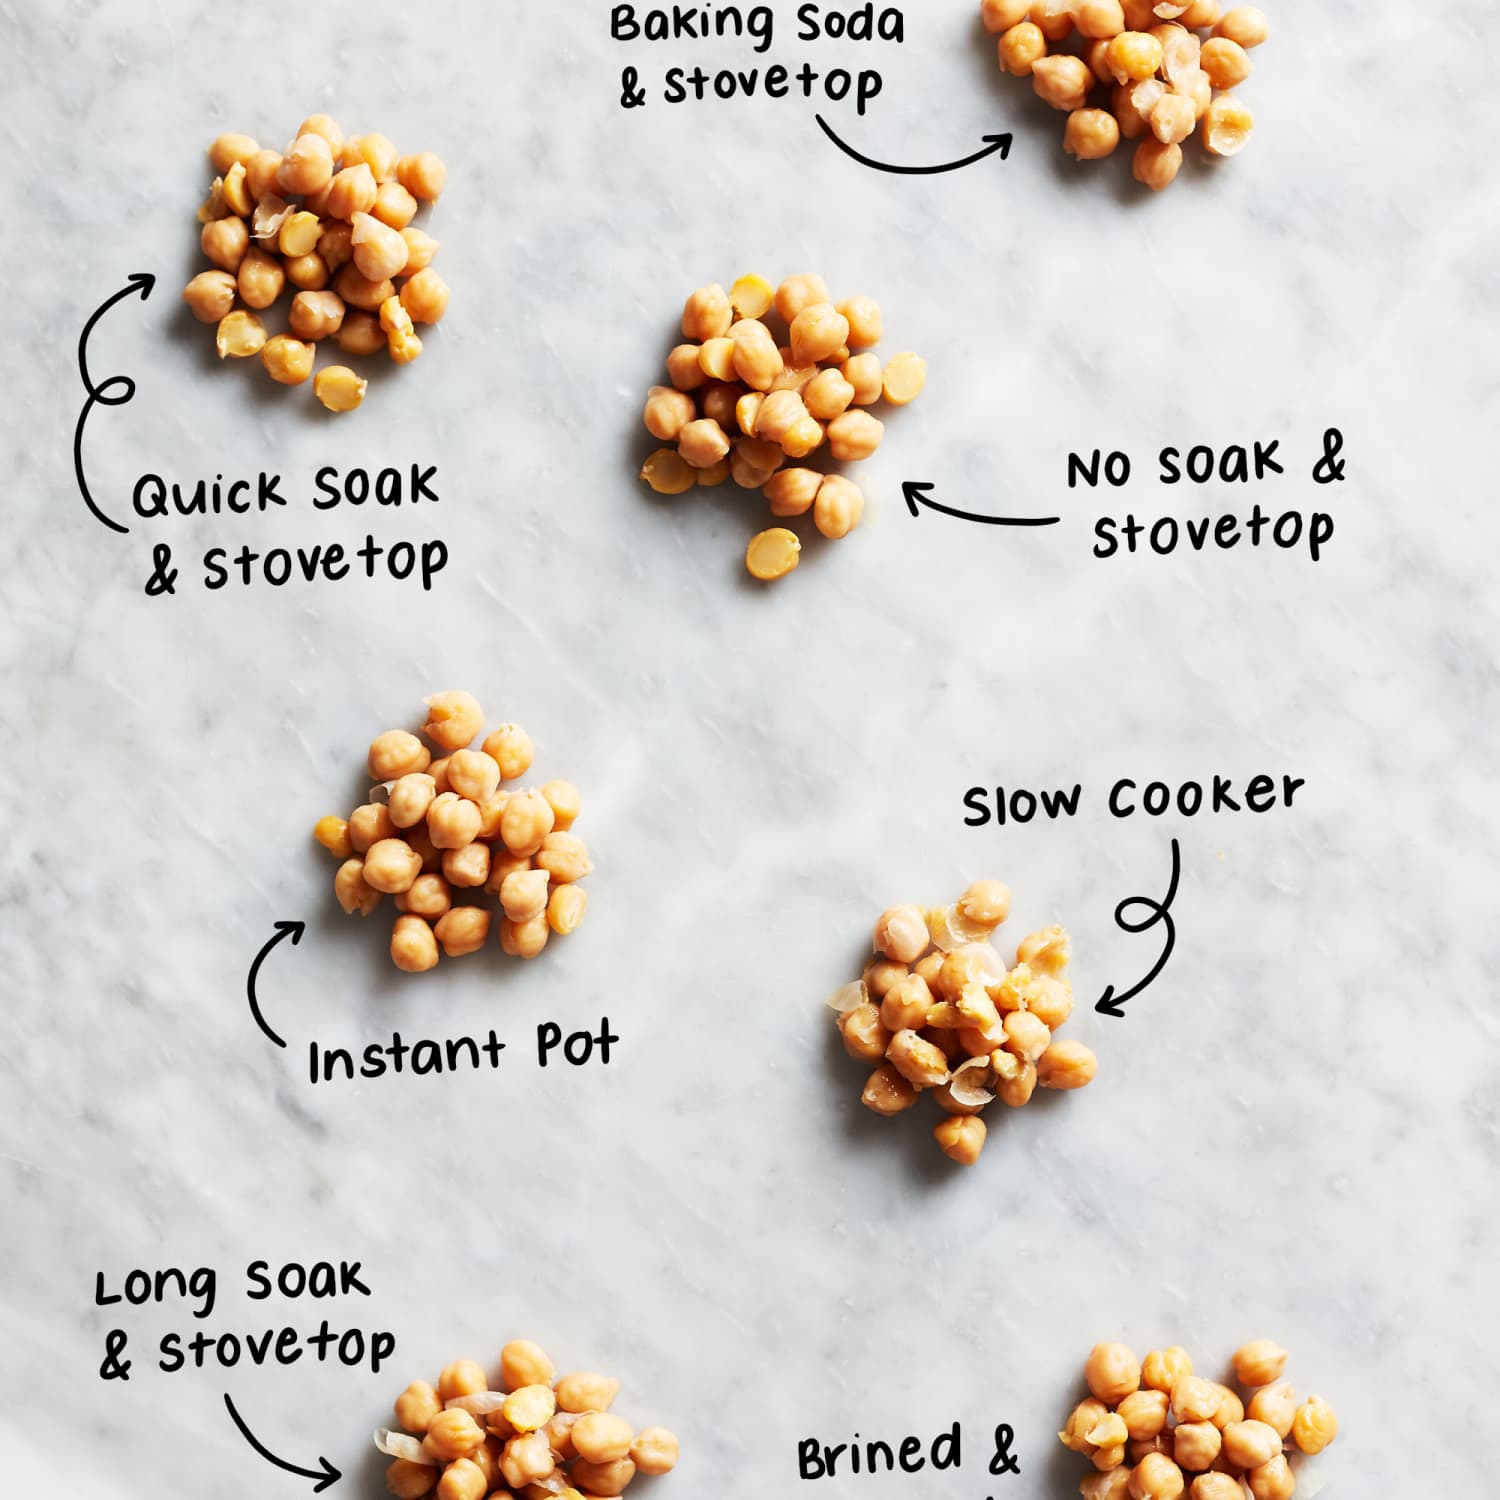 How To Cook Dried Beans in 2 Hours Without Soaking - The Kitchen